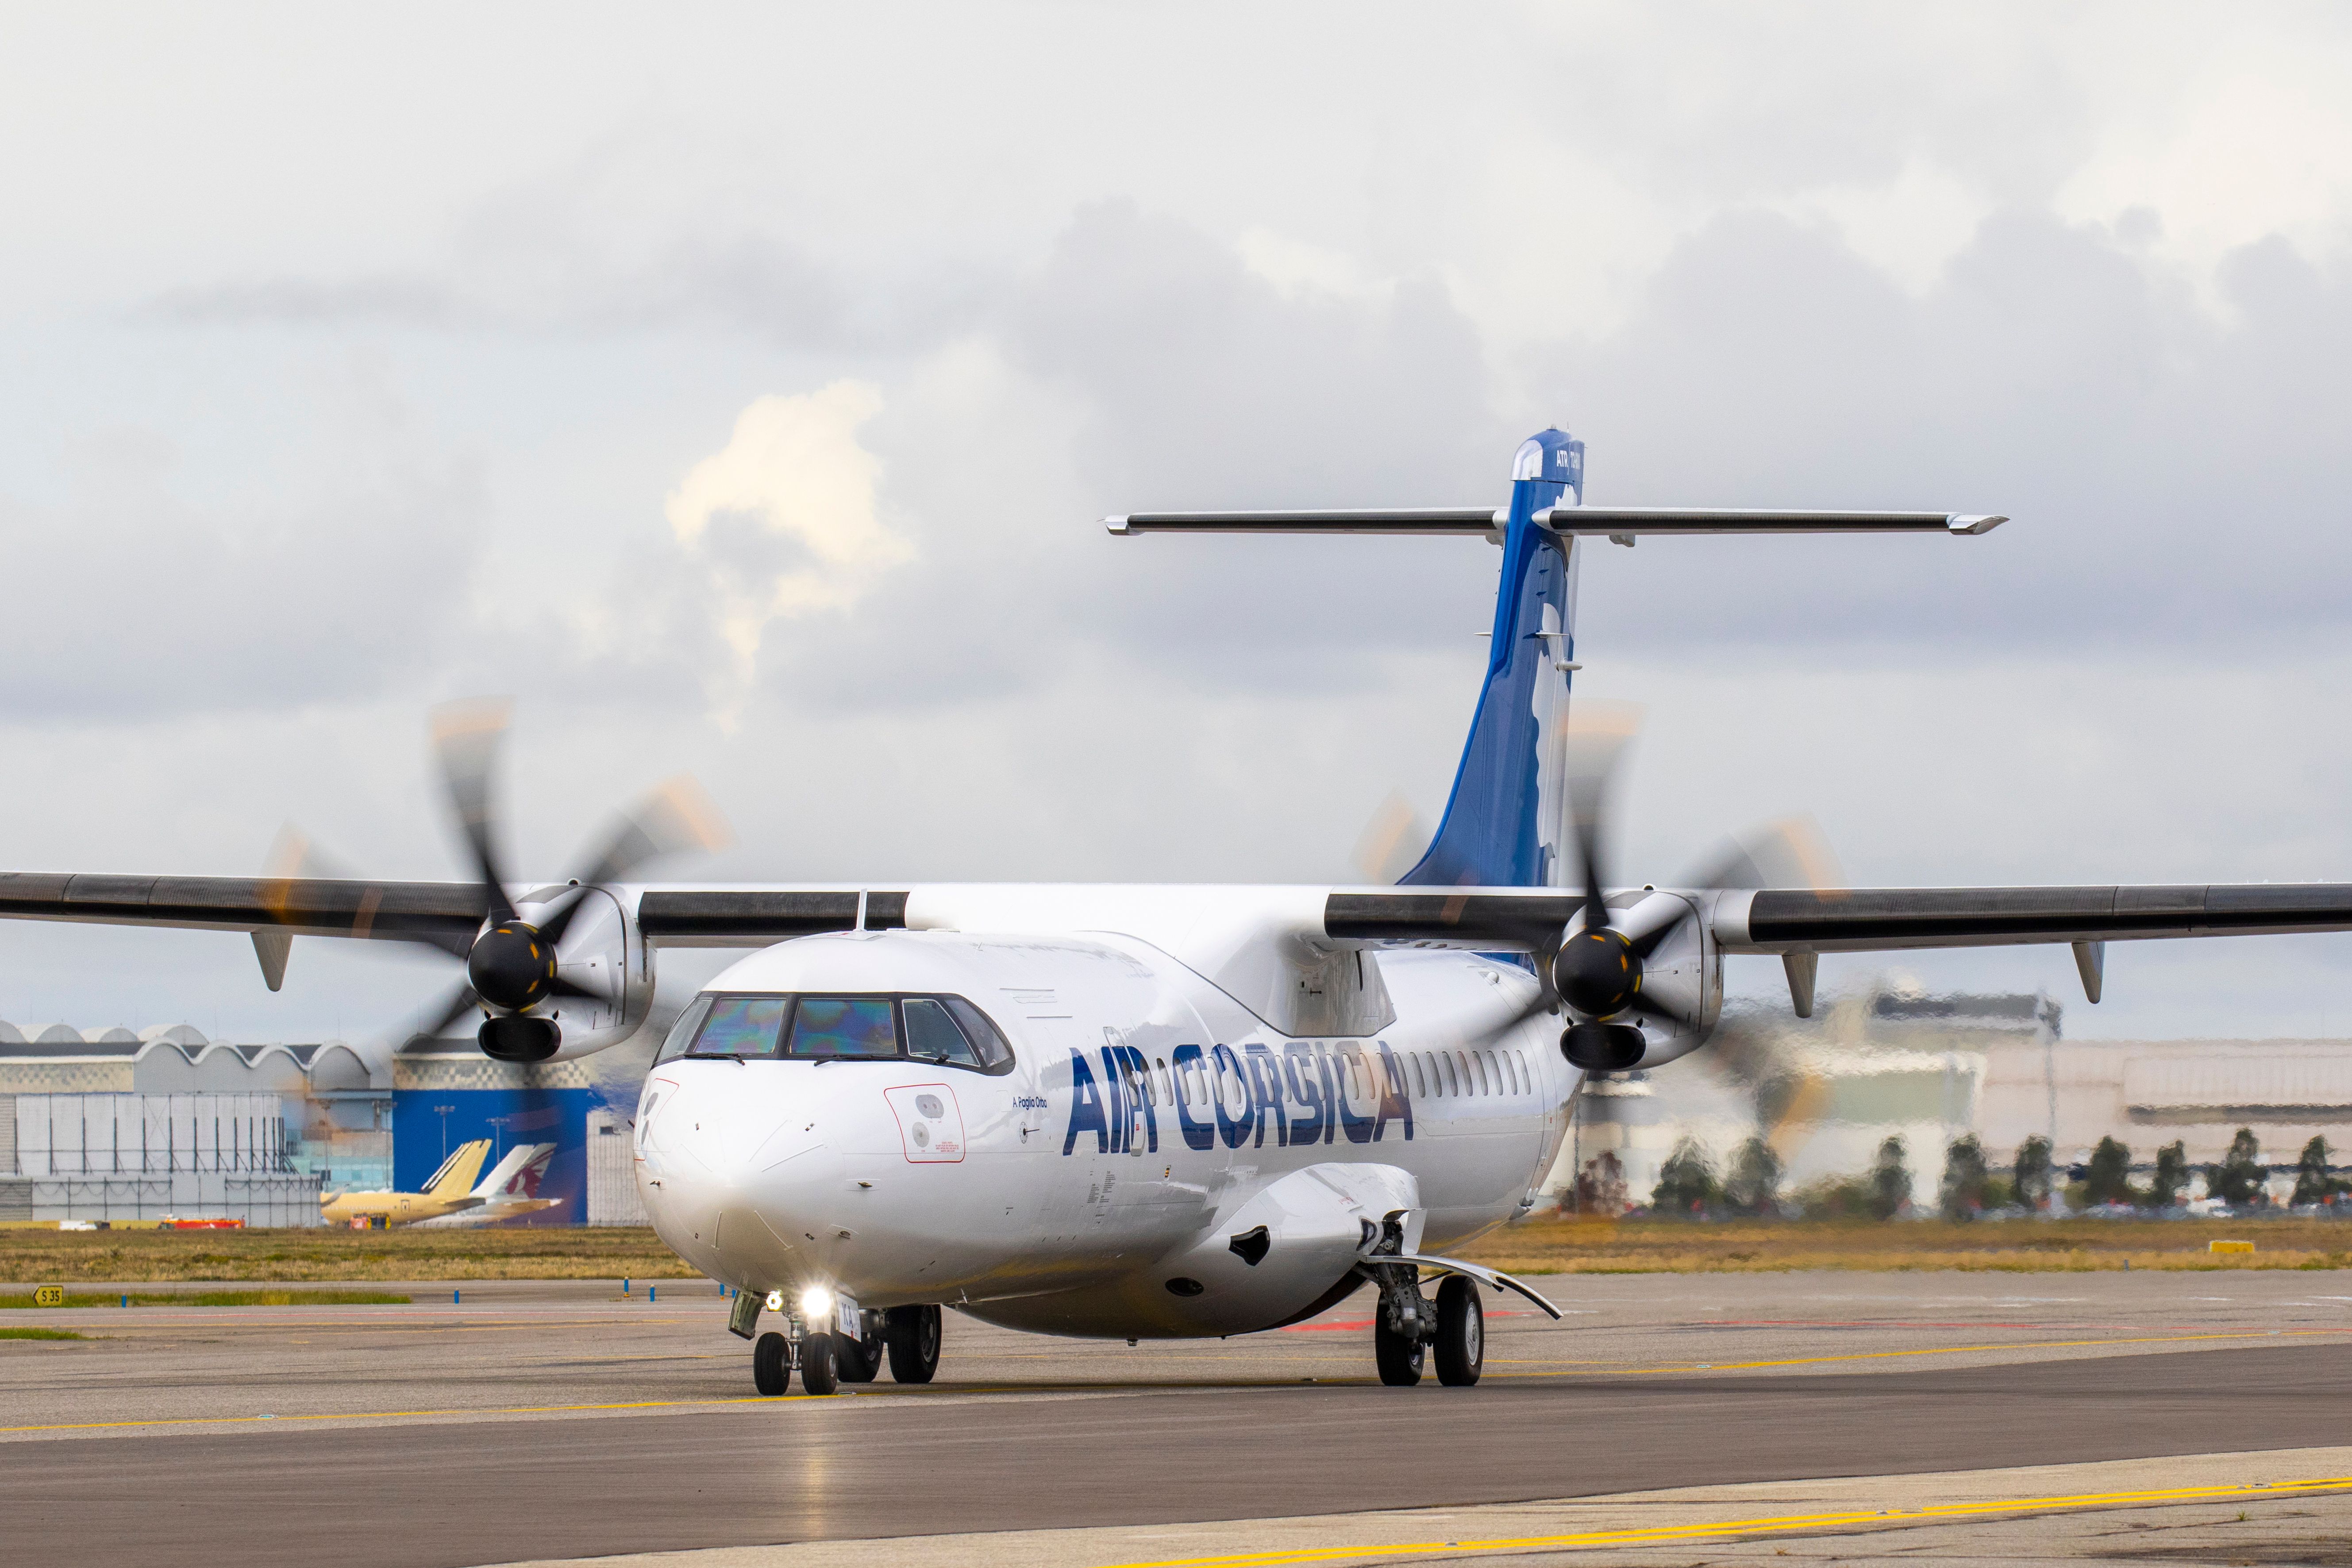 Air Corsica's First ATR 72-600 on the runway.